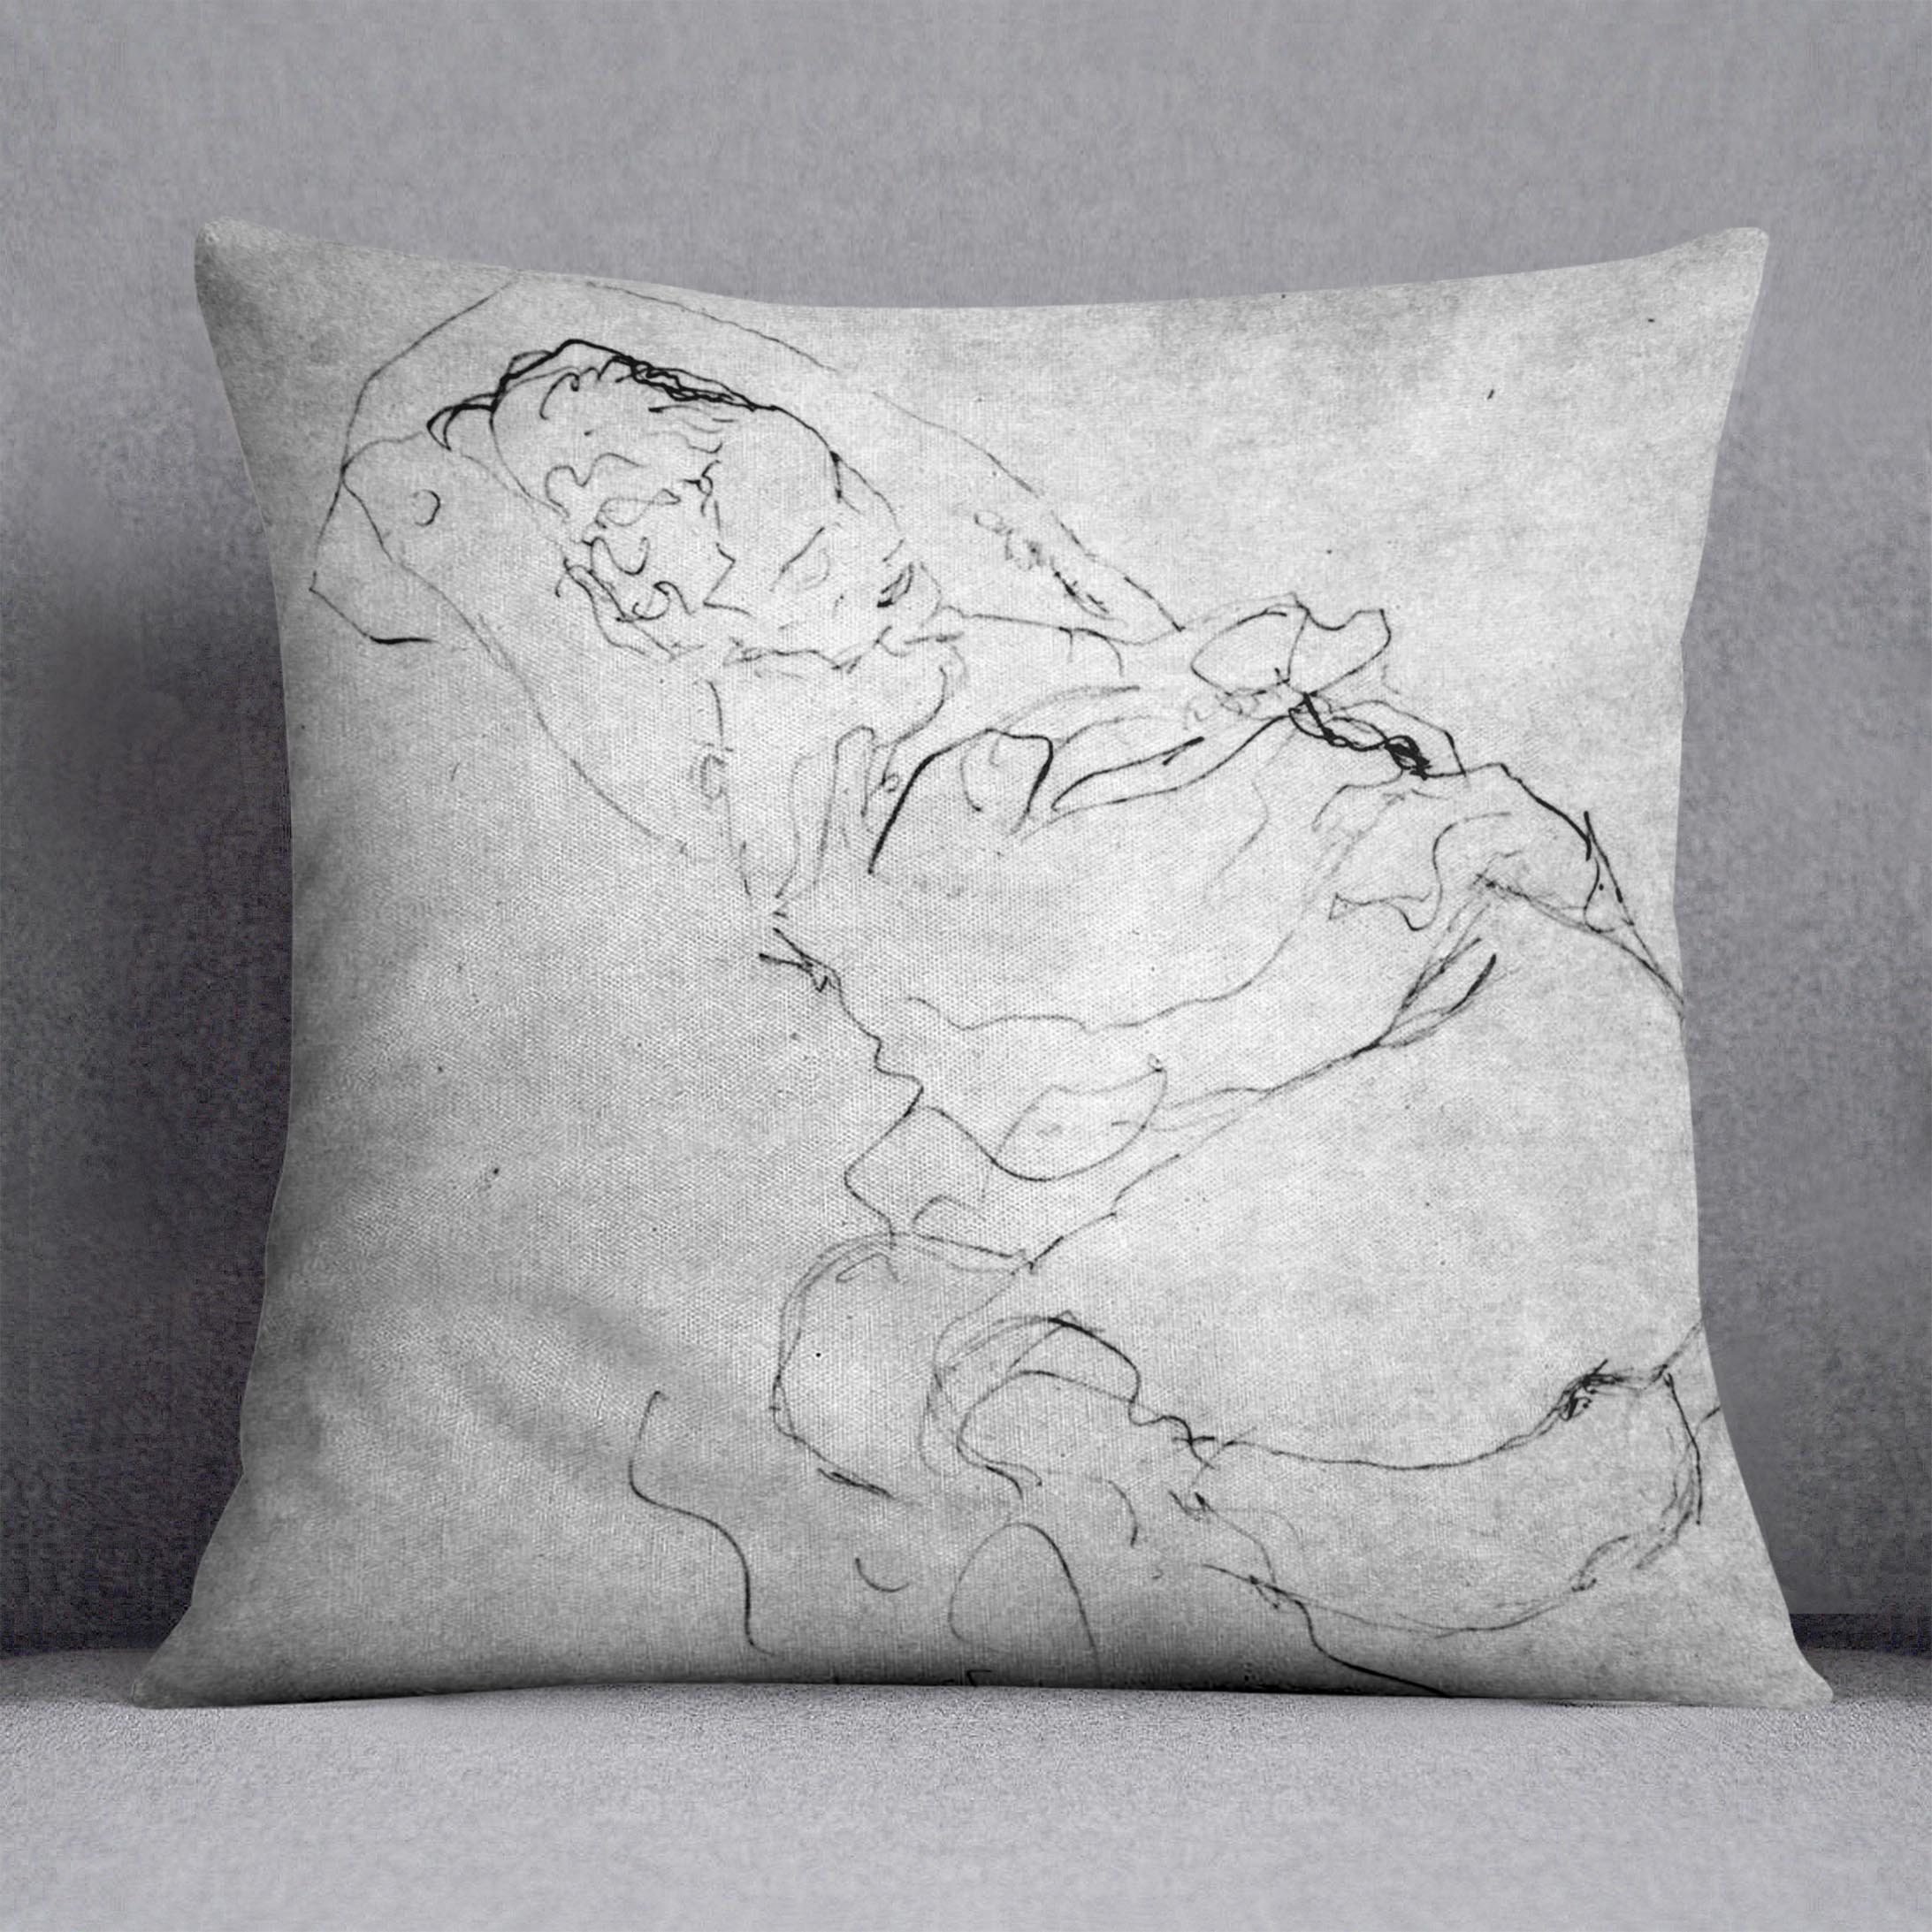 Liegender female over the head with entangled arms by Klimt Cushion